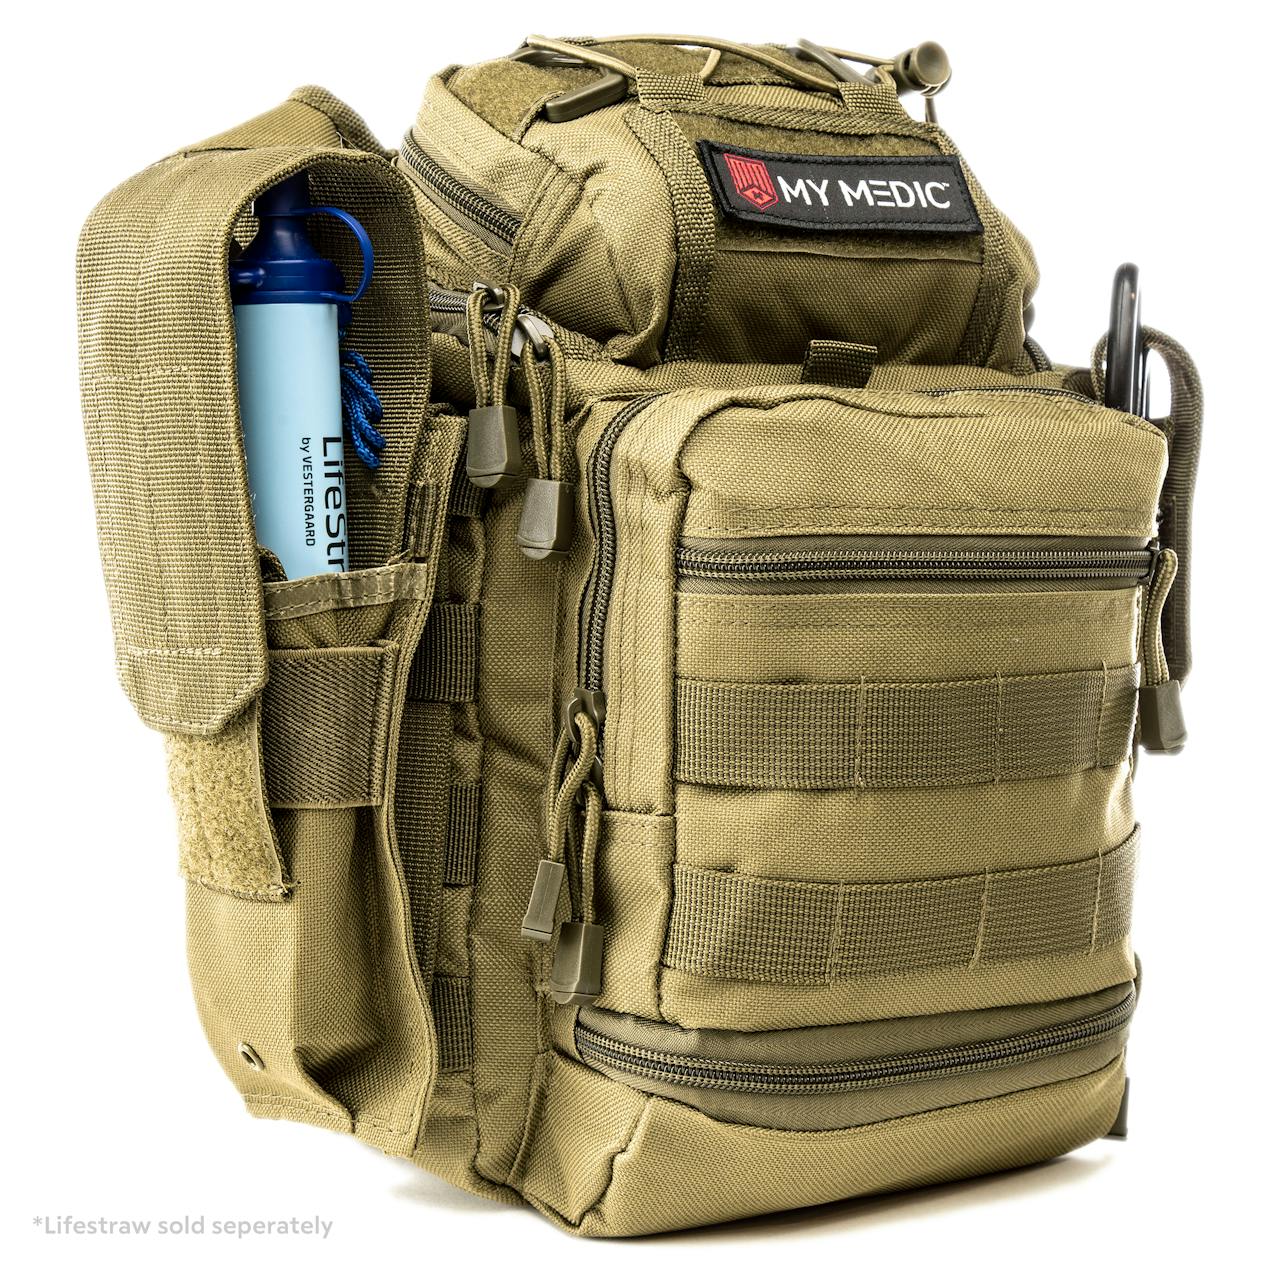 MyMedic The Recon - Fully Stocked First Aid Kit